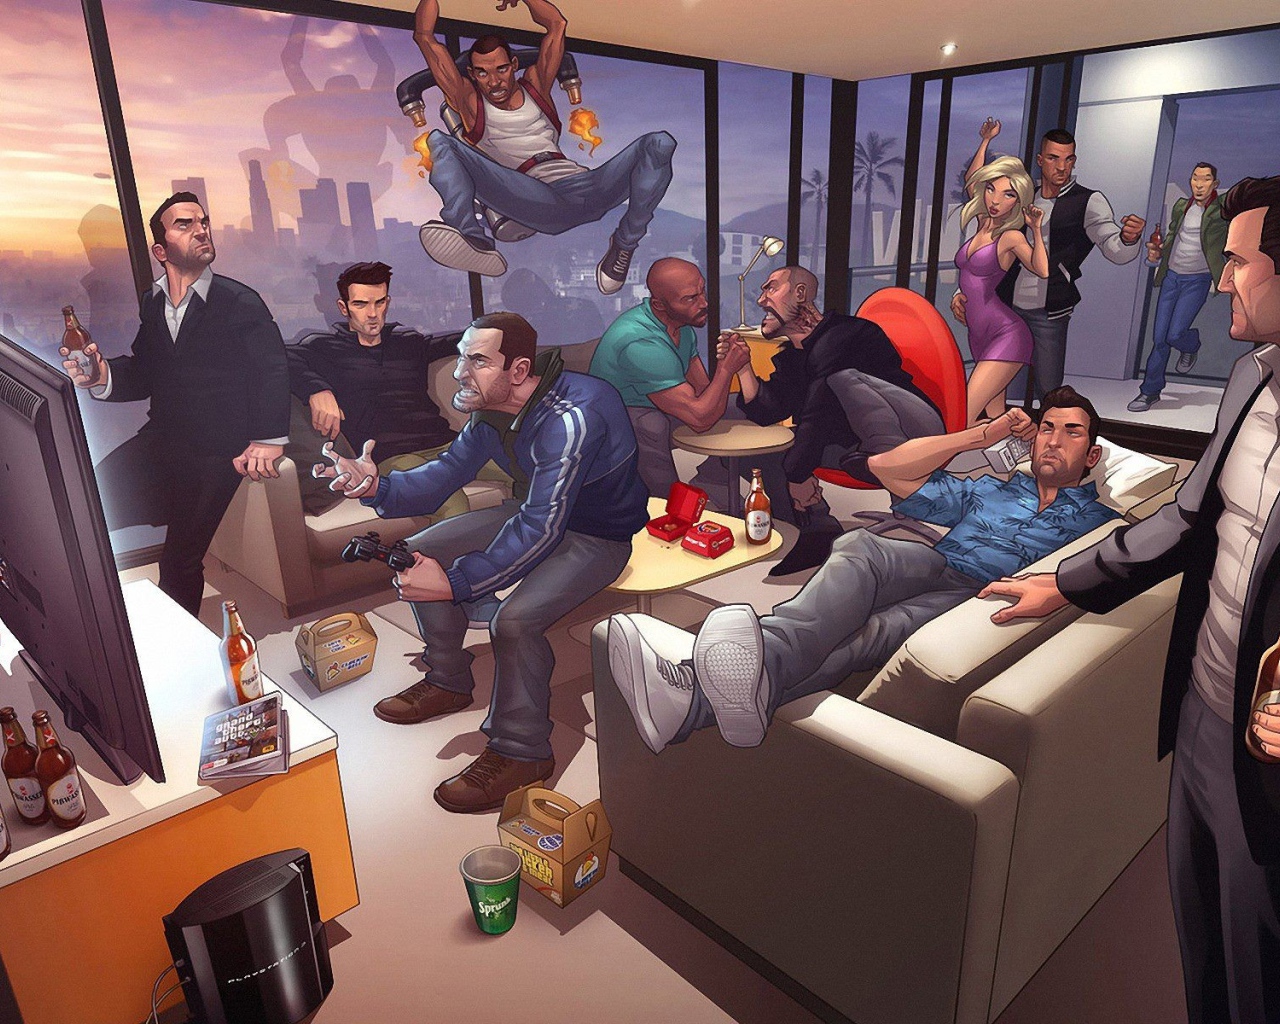 Party heroes of the game Grand Theft Auto V